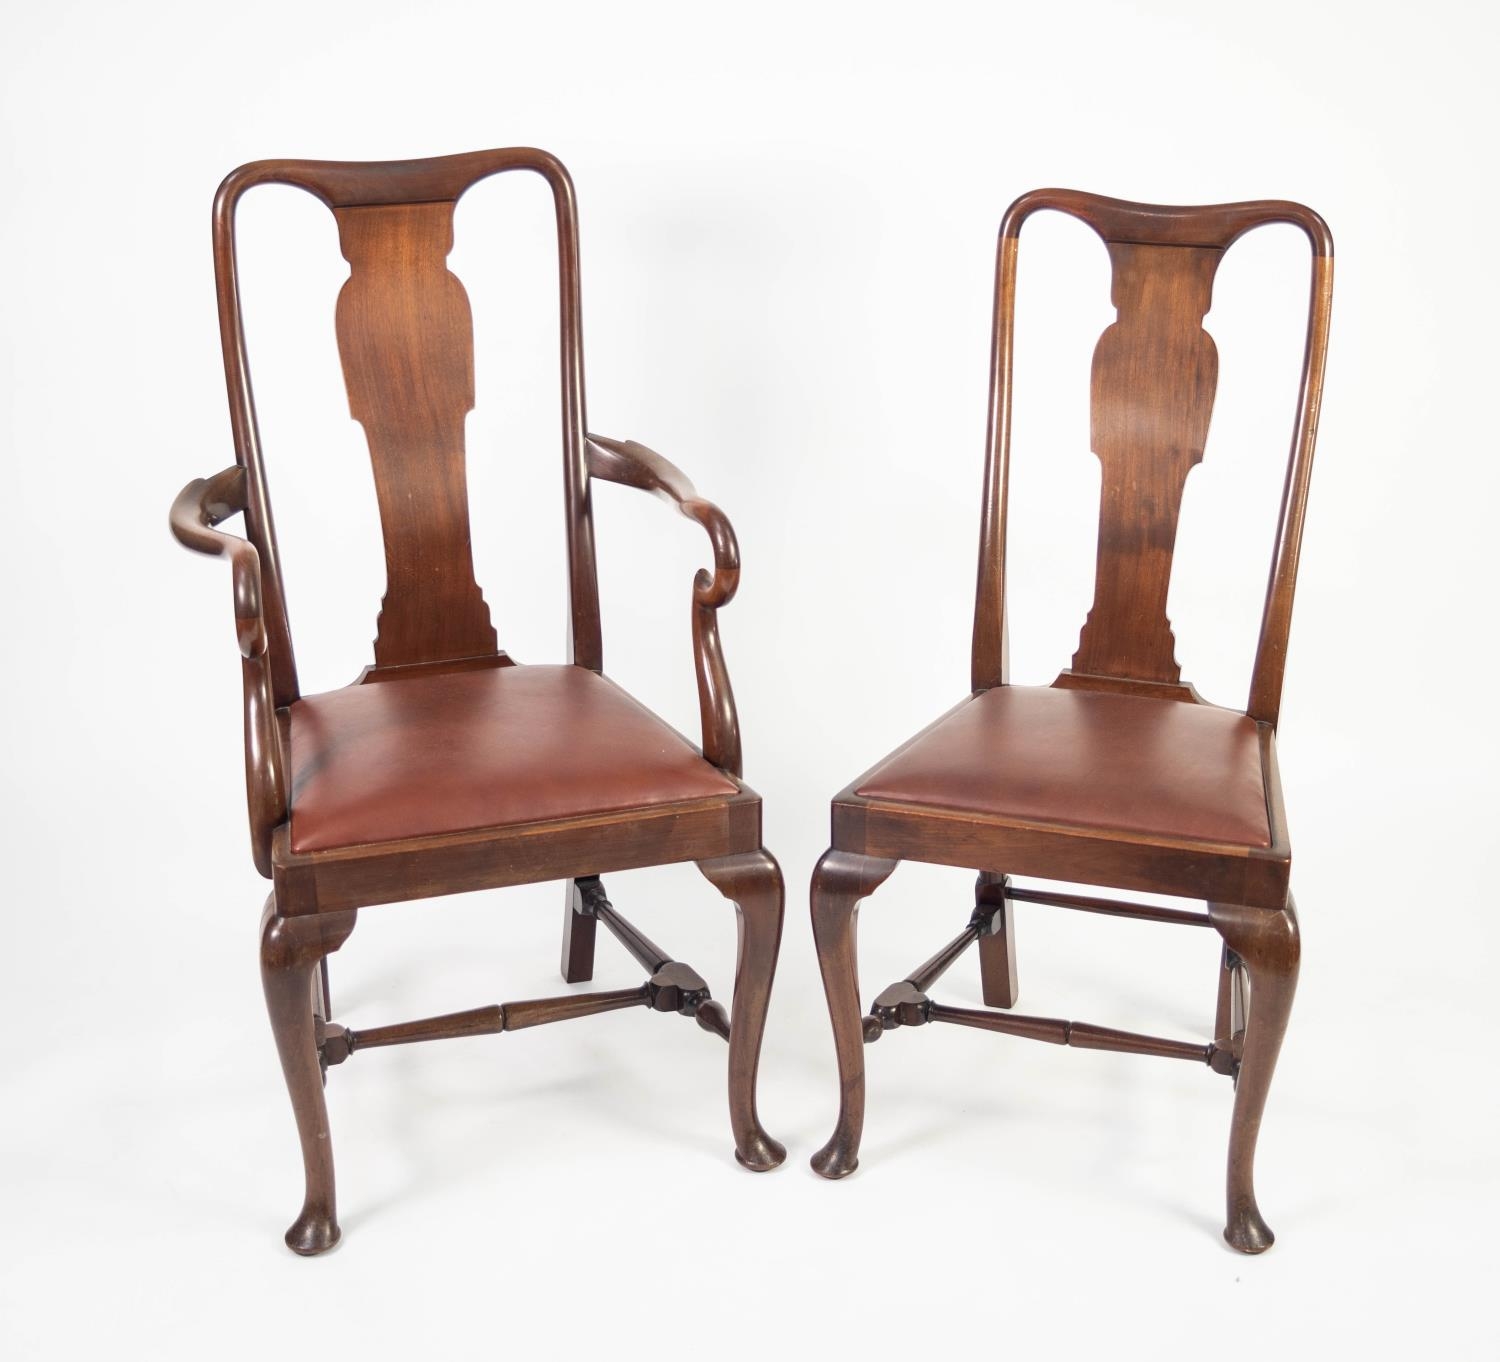 SET OF SIX TWENTIETH CENTURY QUEEN ANNE STYLE MAHOGANY DINING CHAIRS, (4+2), of typical form with